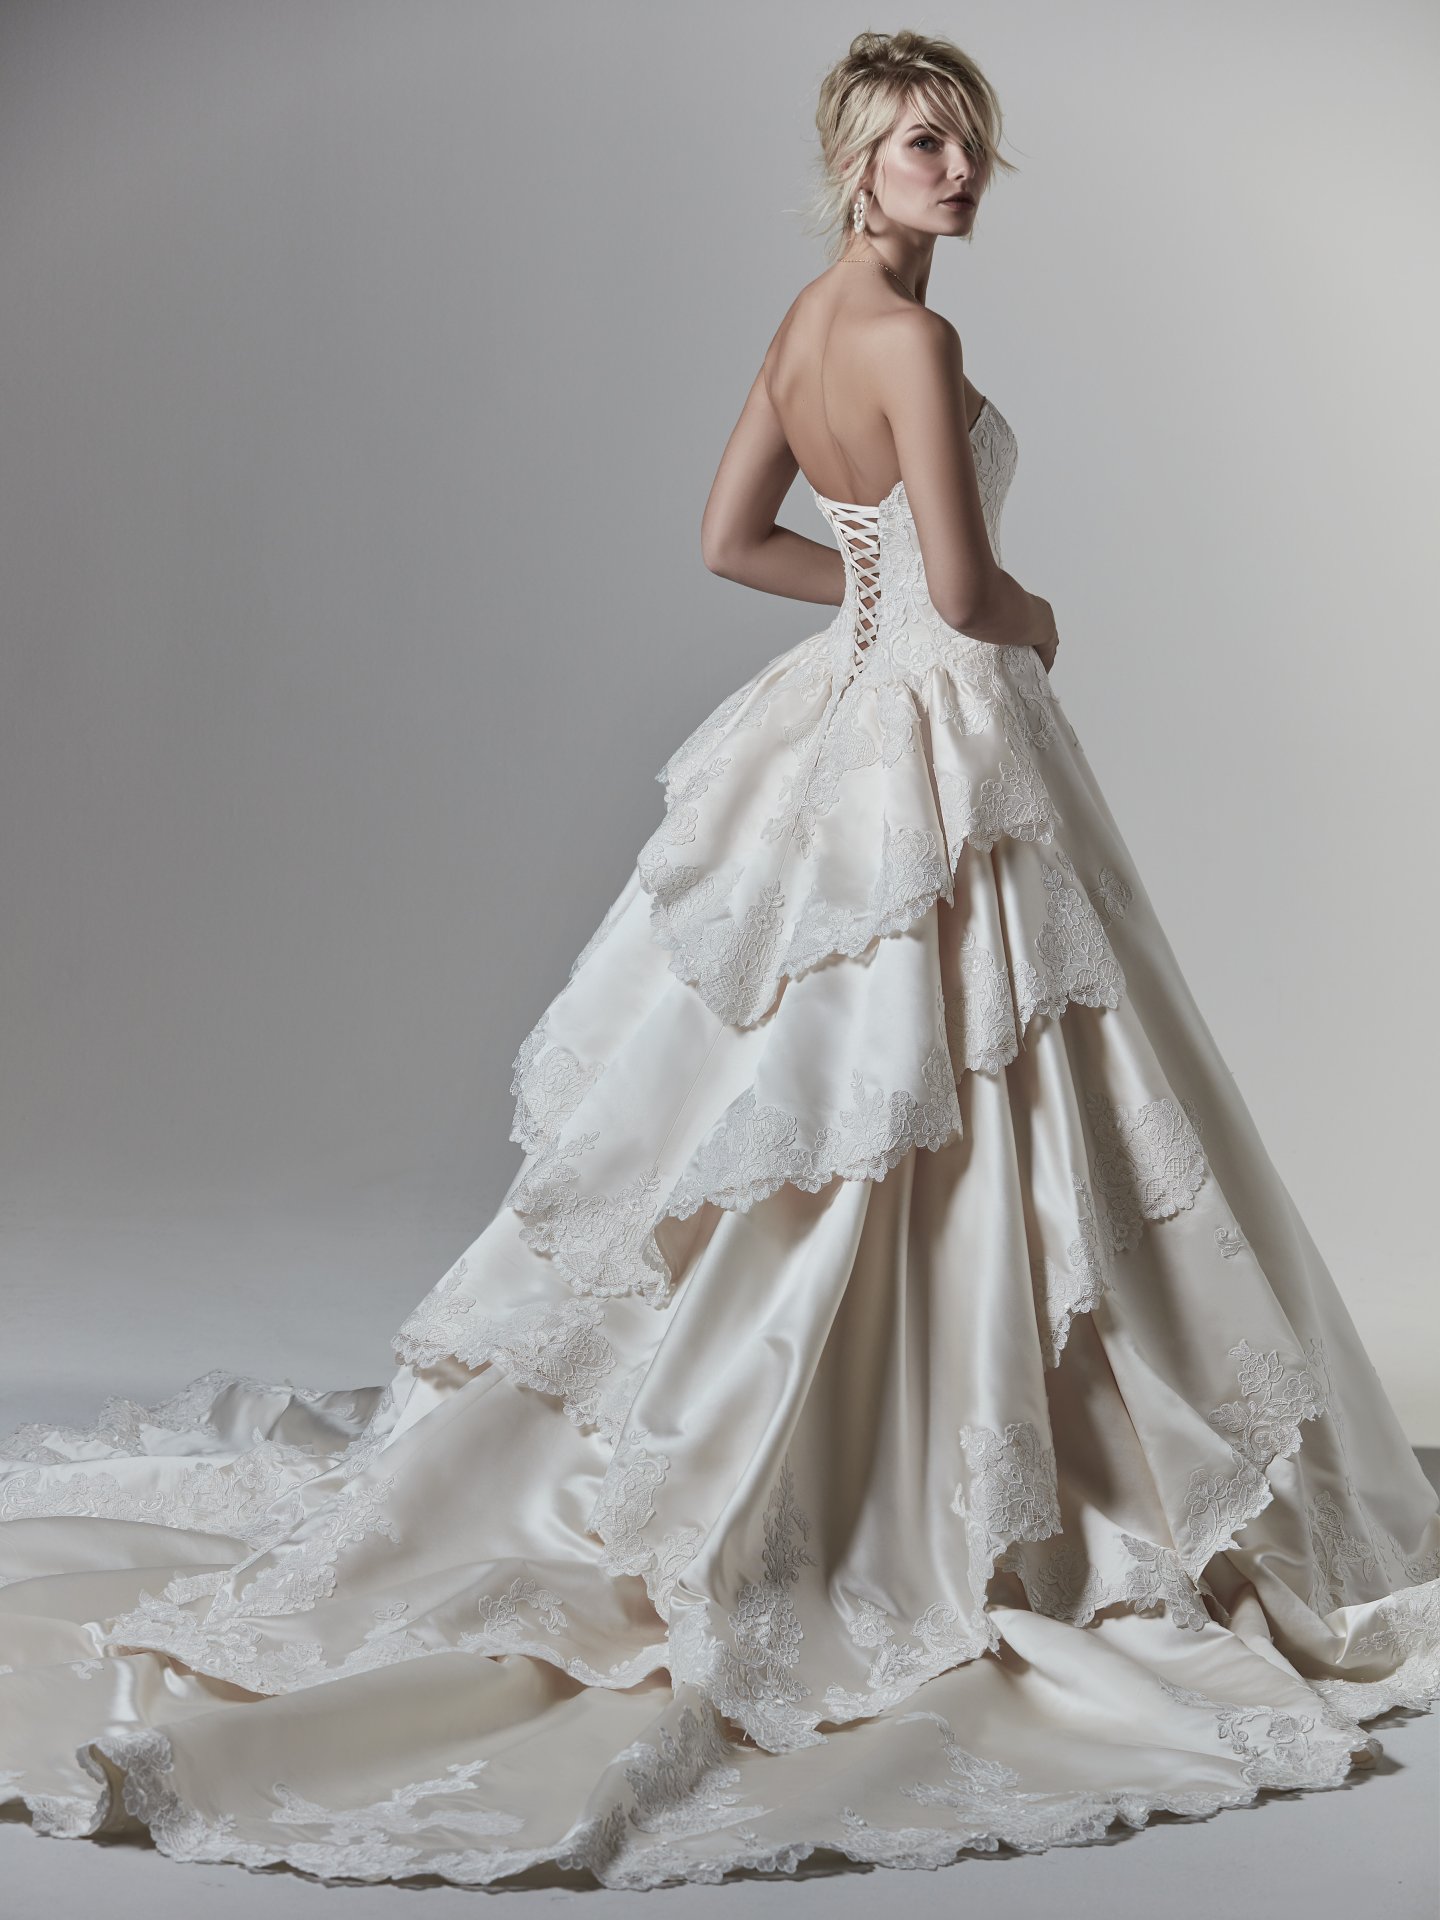 maggie sottero satin ball gown